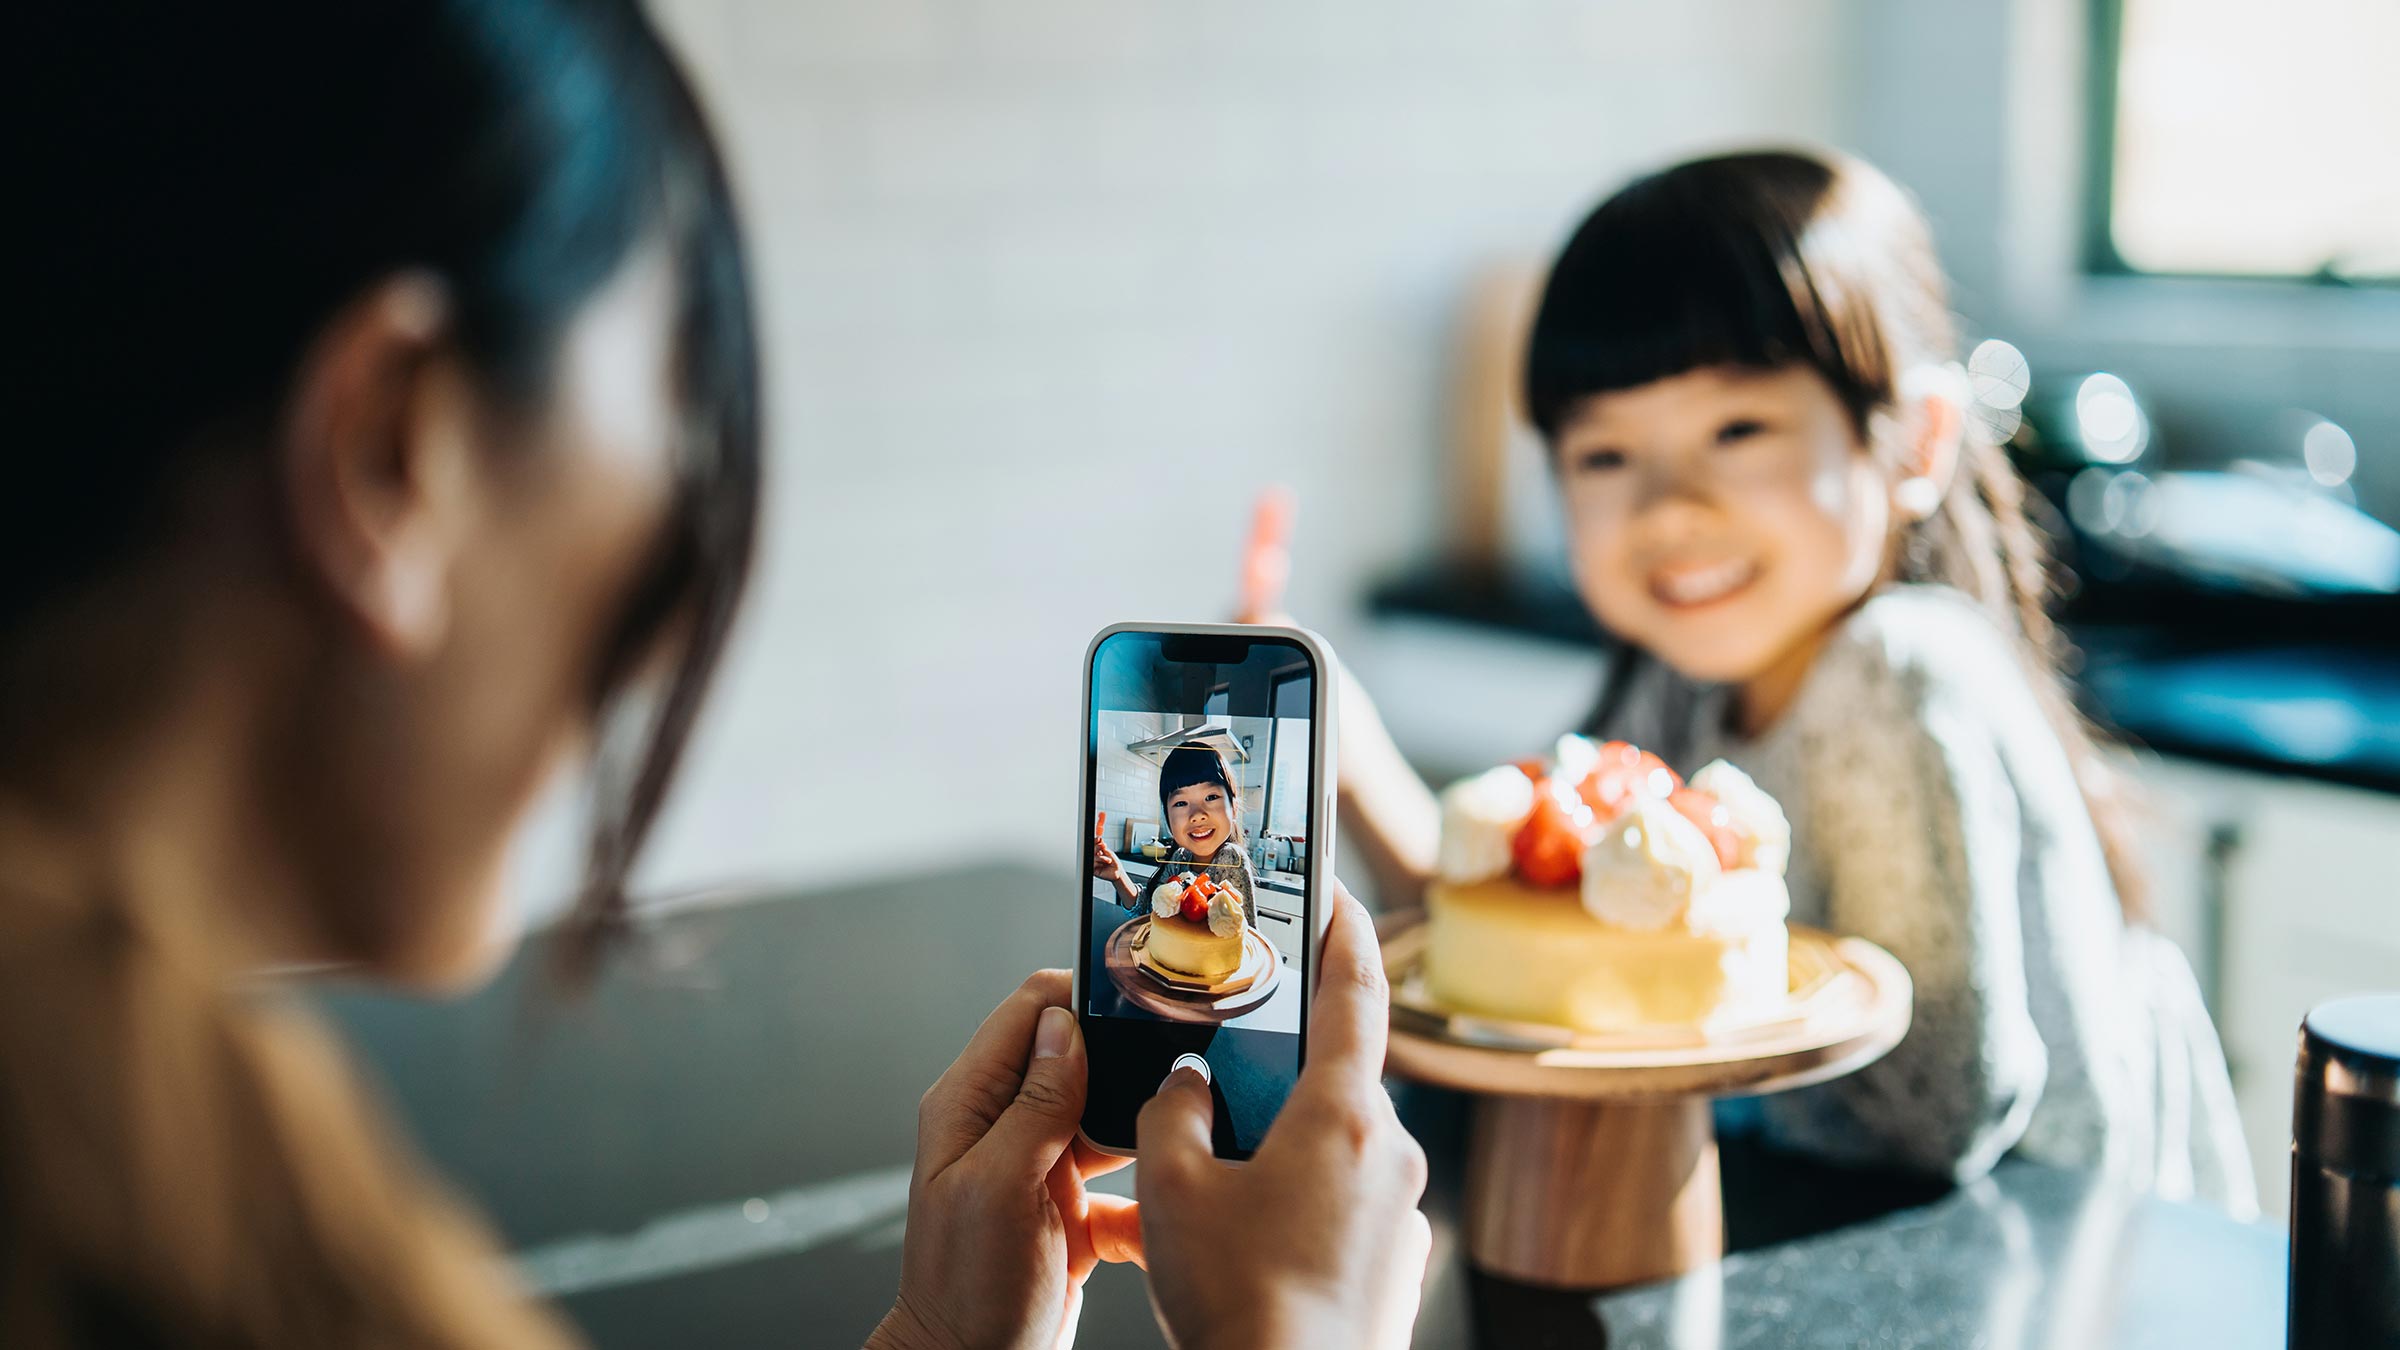 A mother takes a picture of her daughter with a cake